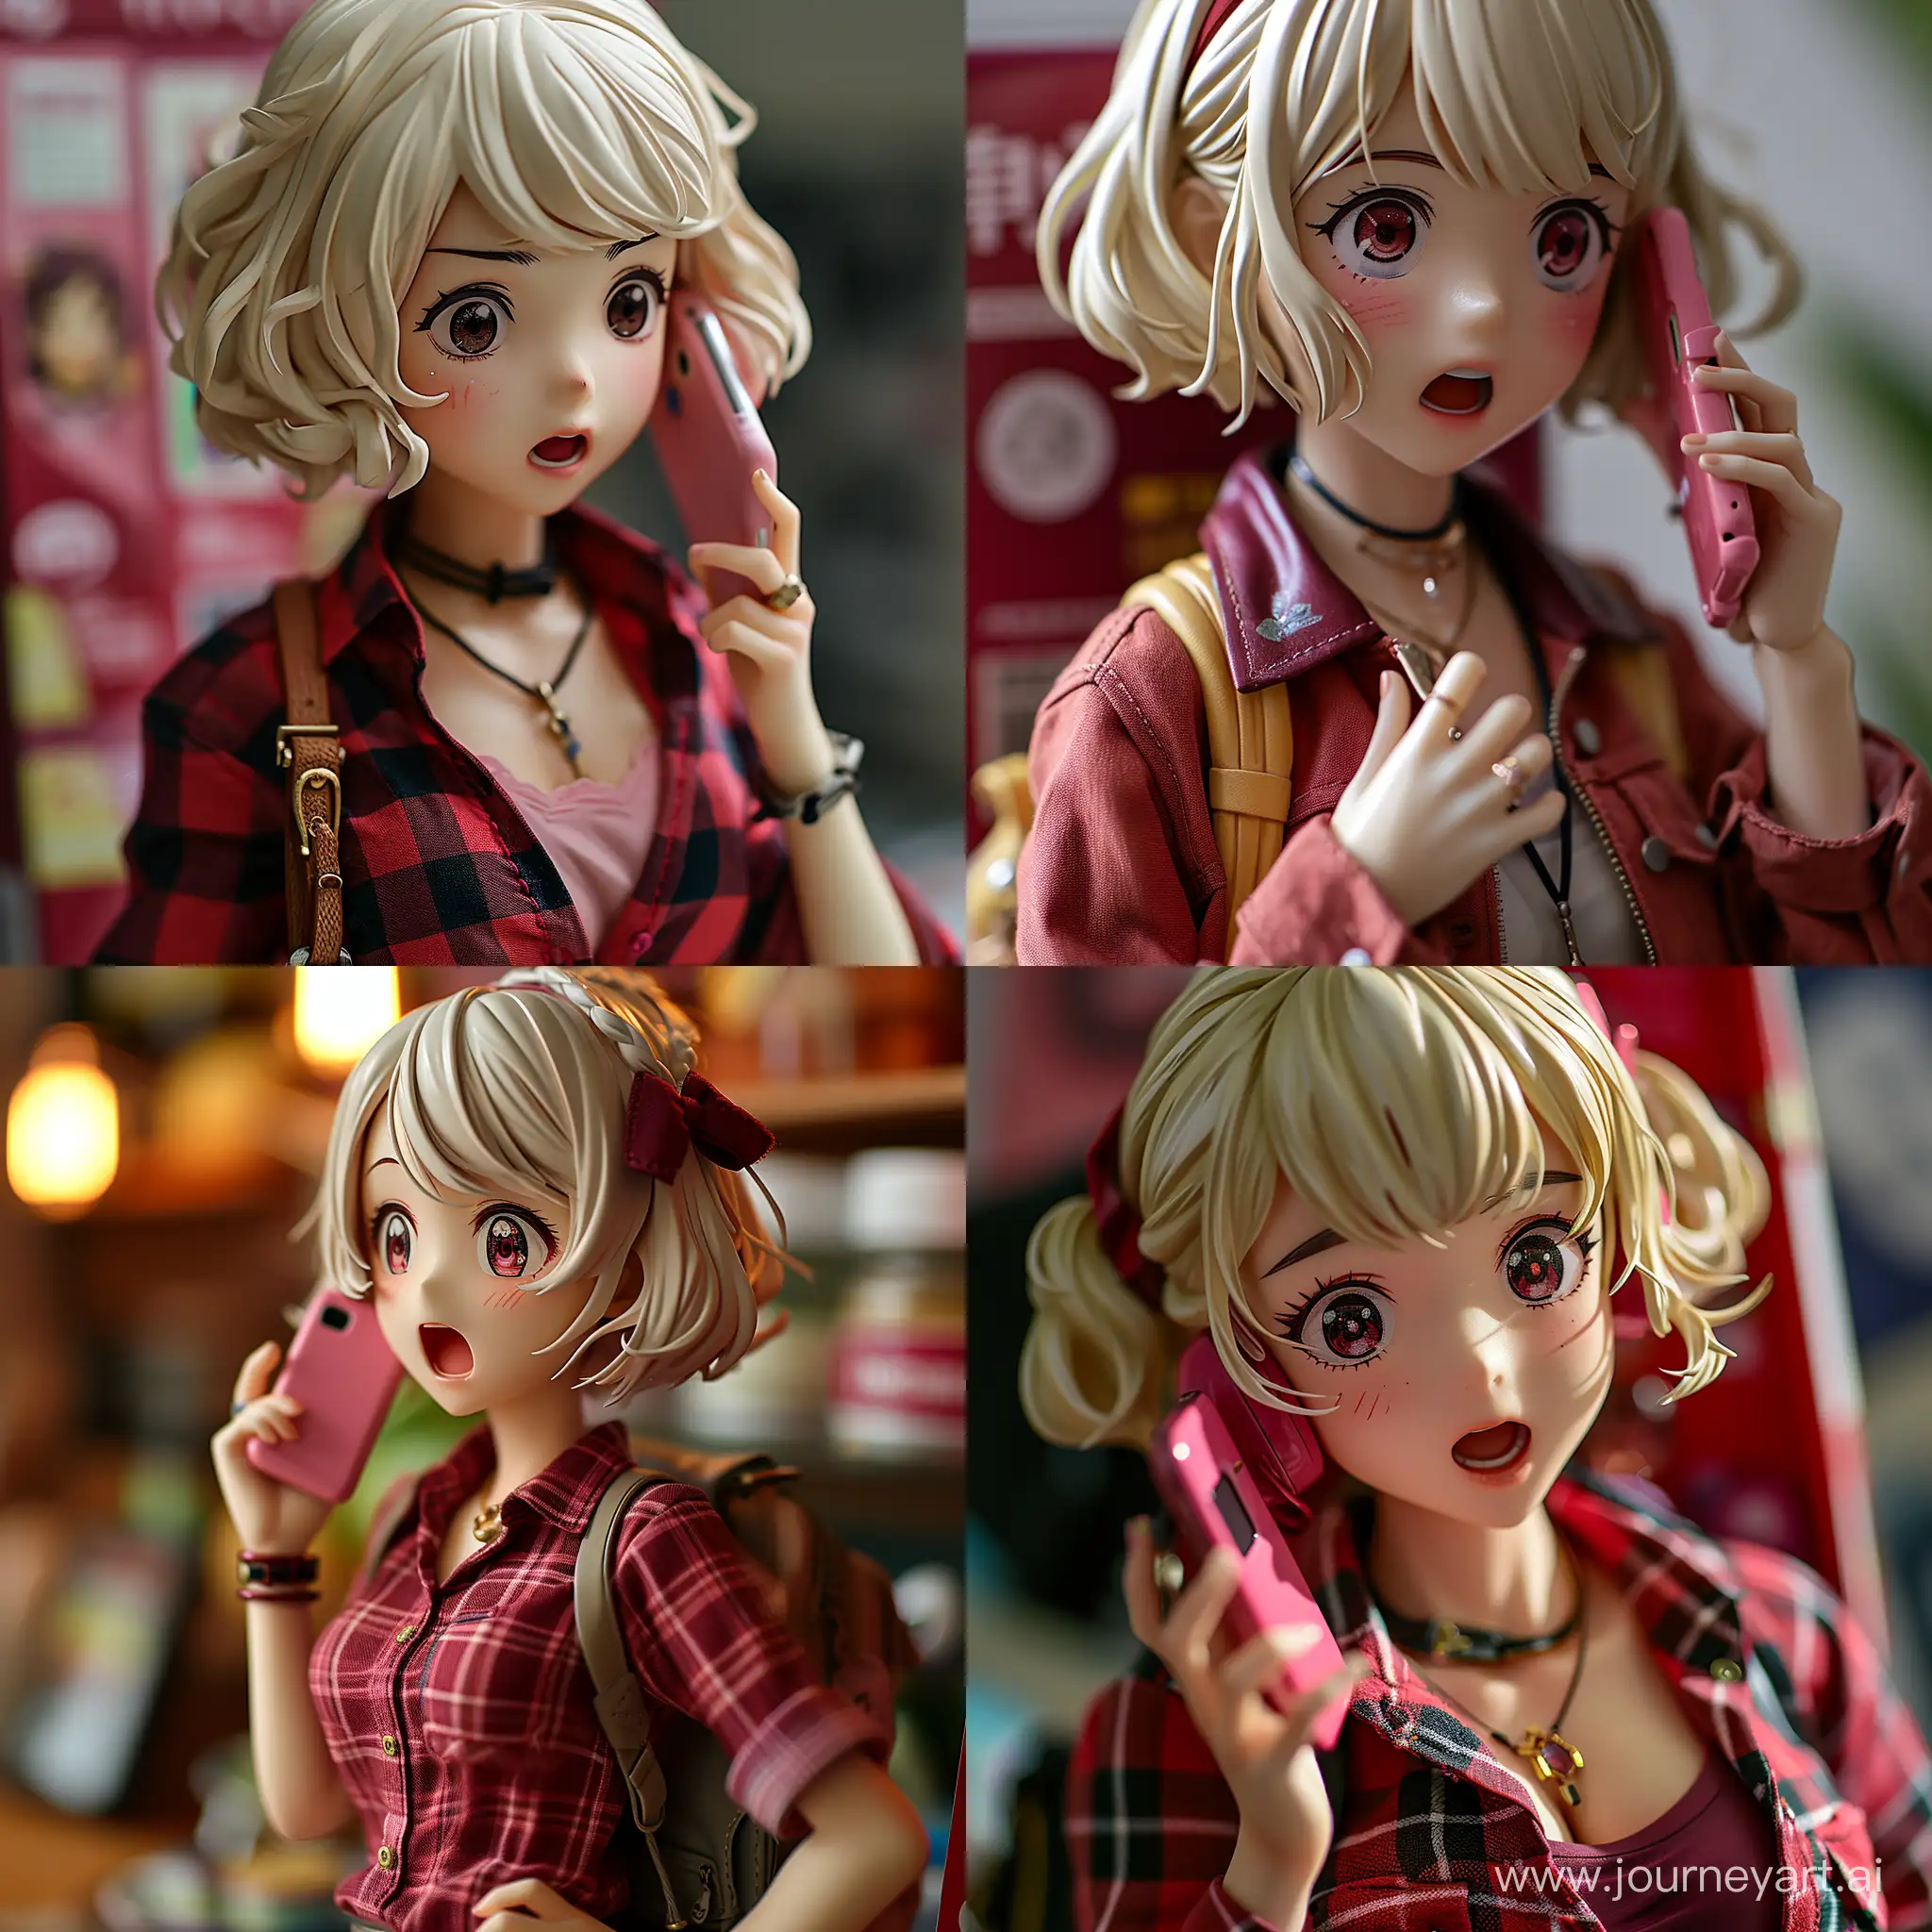 imagine  Chisato Nishikigi from Lycoris Recoil 
 as an ultra limited edition anime figurines in an unopened, sealed retail box, holographic stickers, kawai, talking to a pink cellphone as a pose, blonde hair, burgundy tone hair, surprised or concerned facial expression   --s 750 --v 6